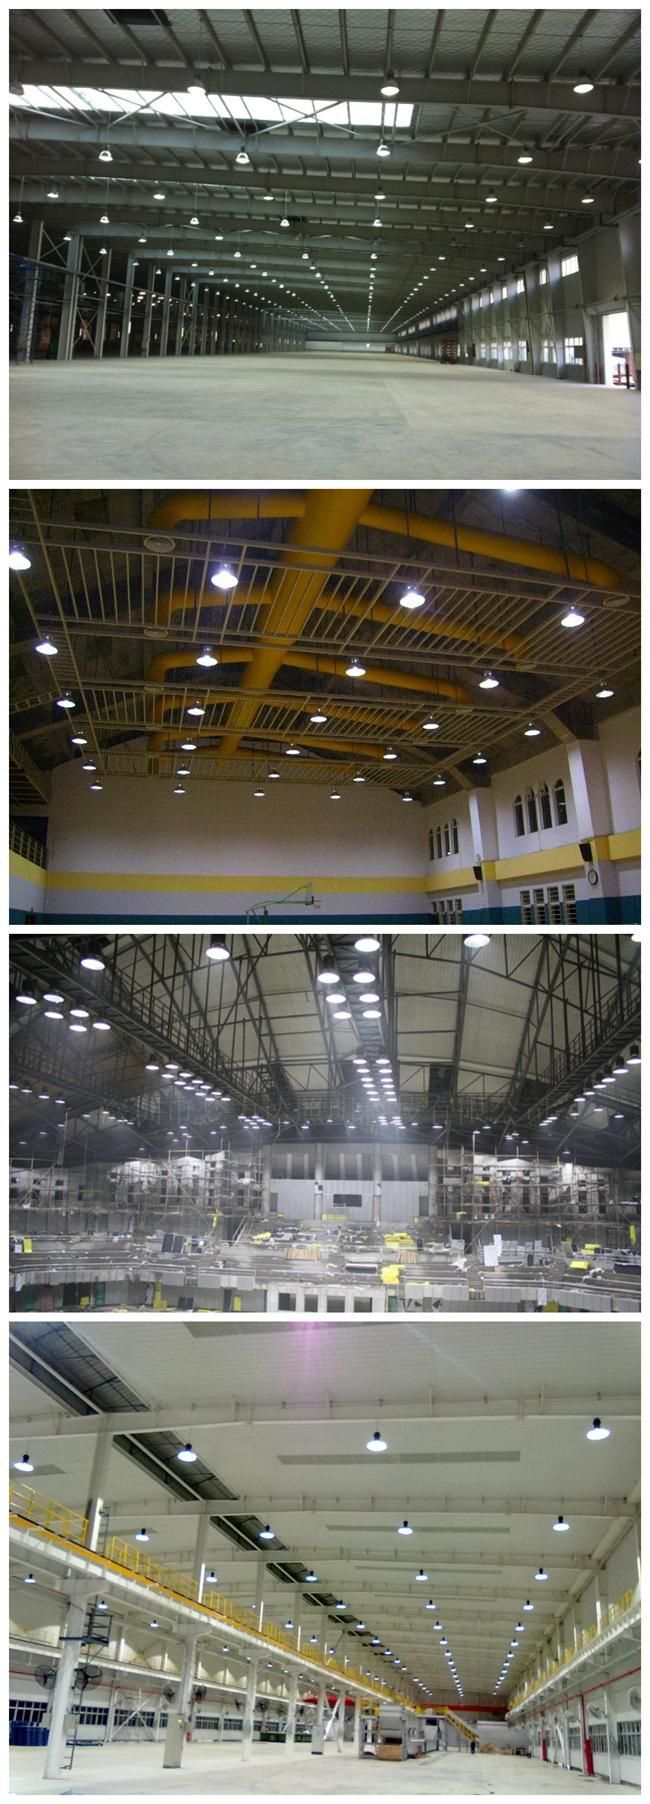 Good Quality LED Industrial Light with Alu Shell UFO LED High Bay Light 200W